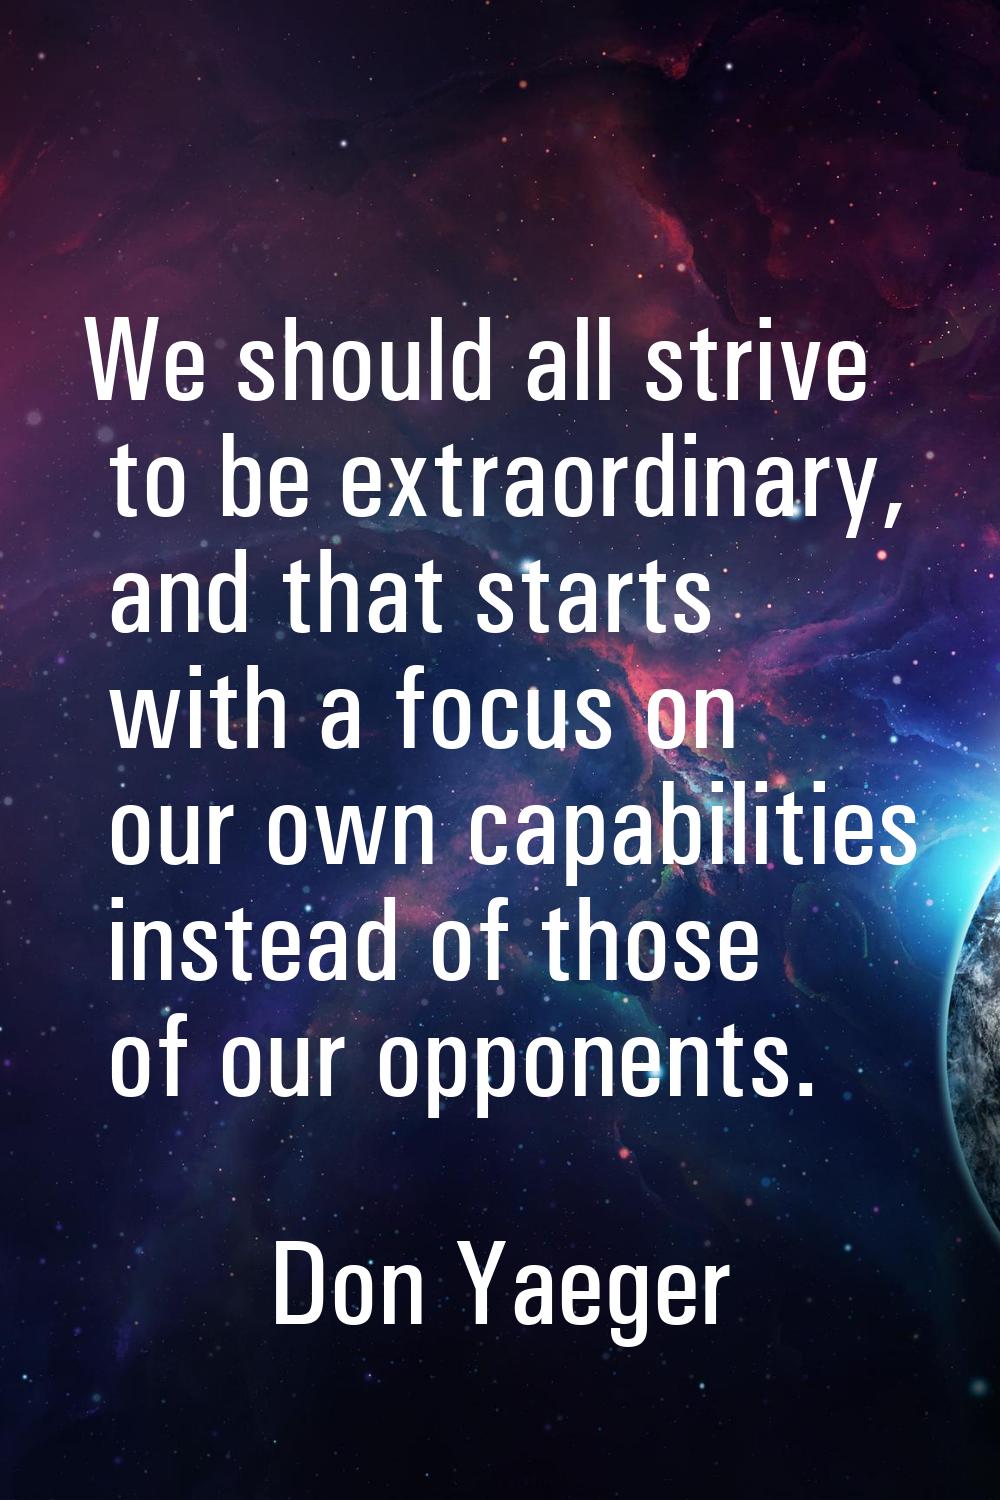 We should all strive to be extraordinary, and that starts with a focus on our own capabilities inst